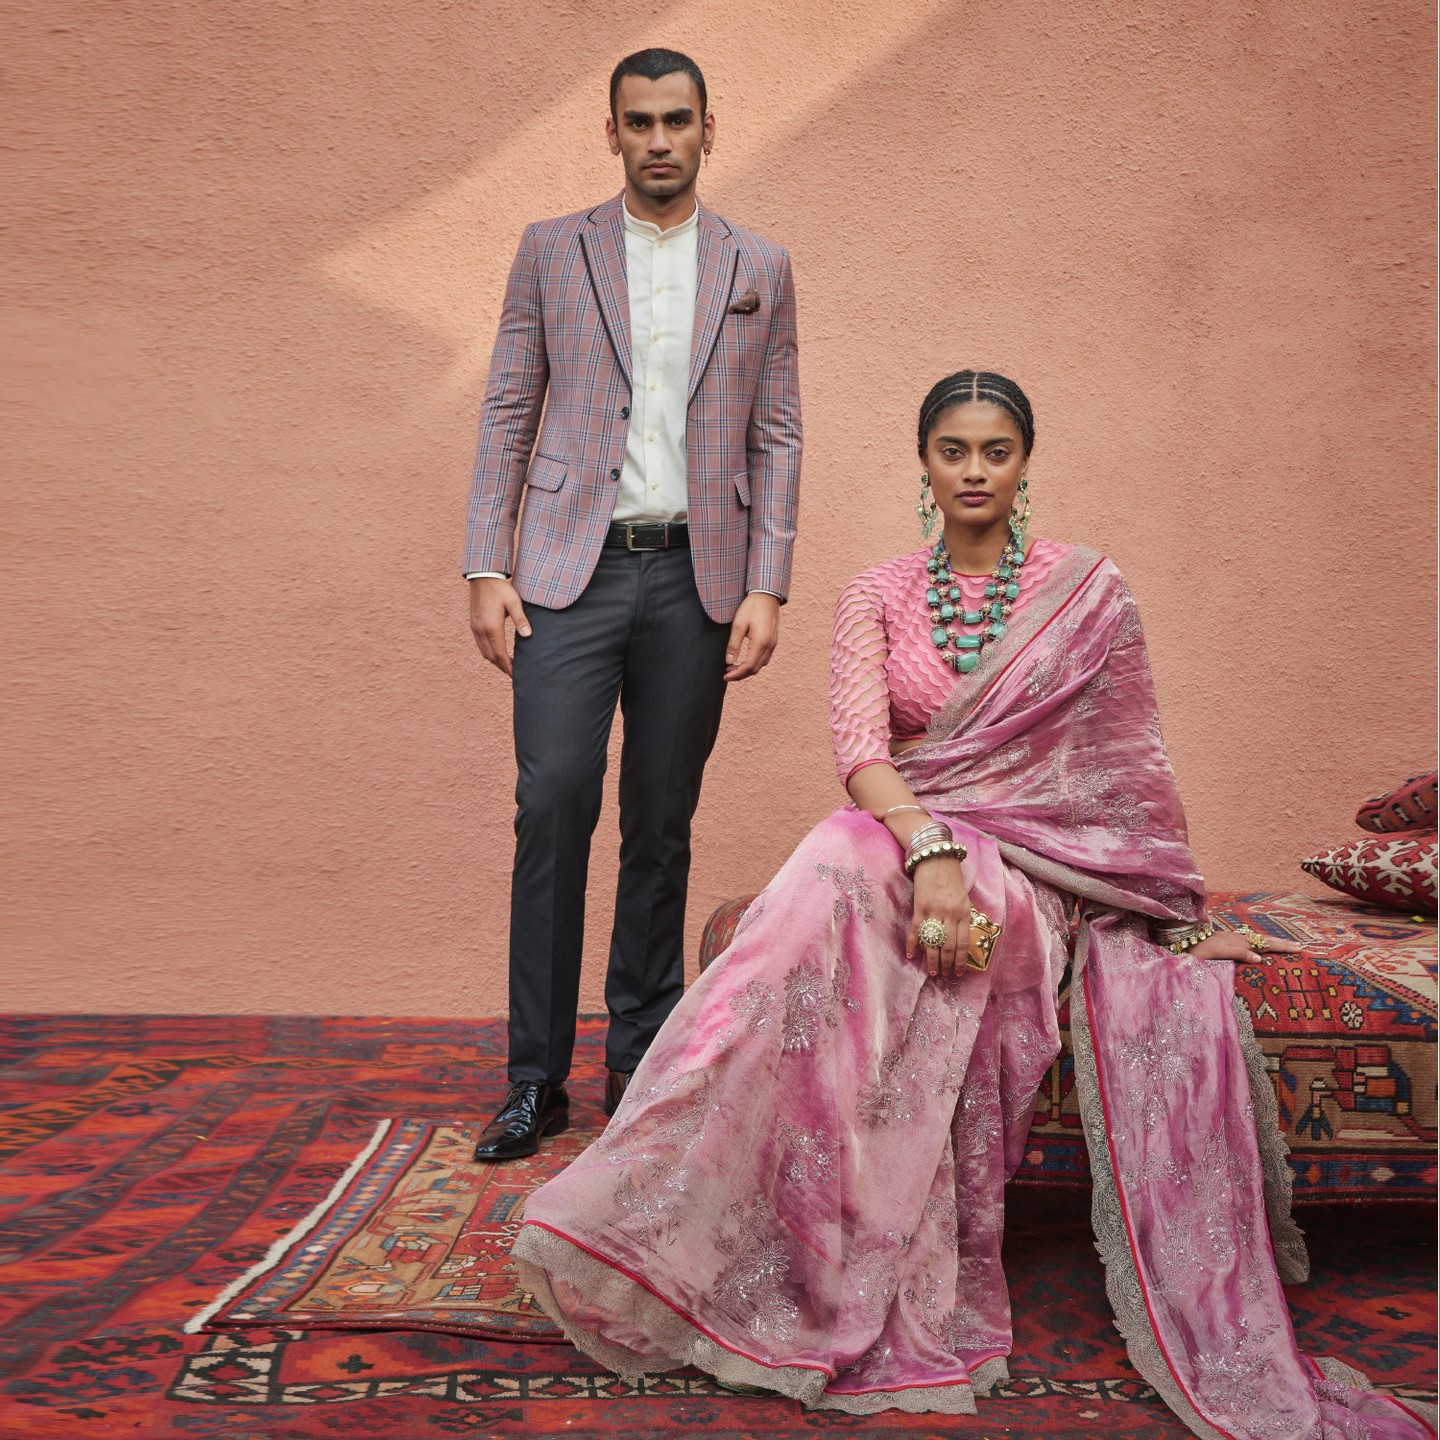 JADE By MK’s ‘Rangrez’ Is A Sonnet For A Refreshing Summer Wedding